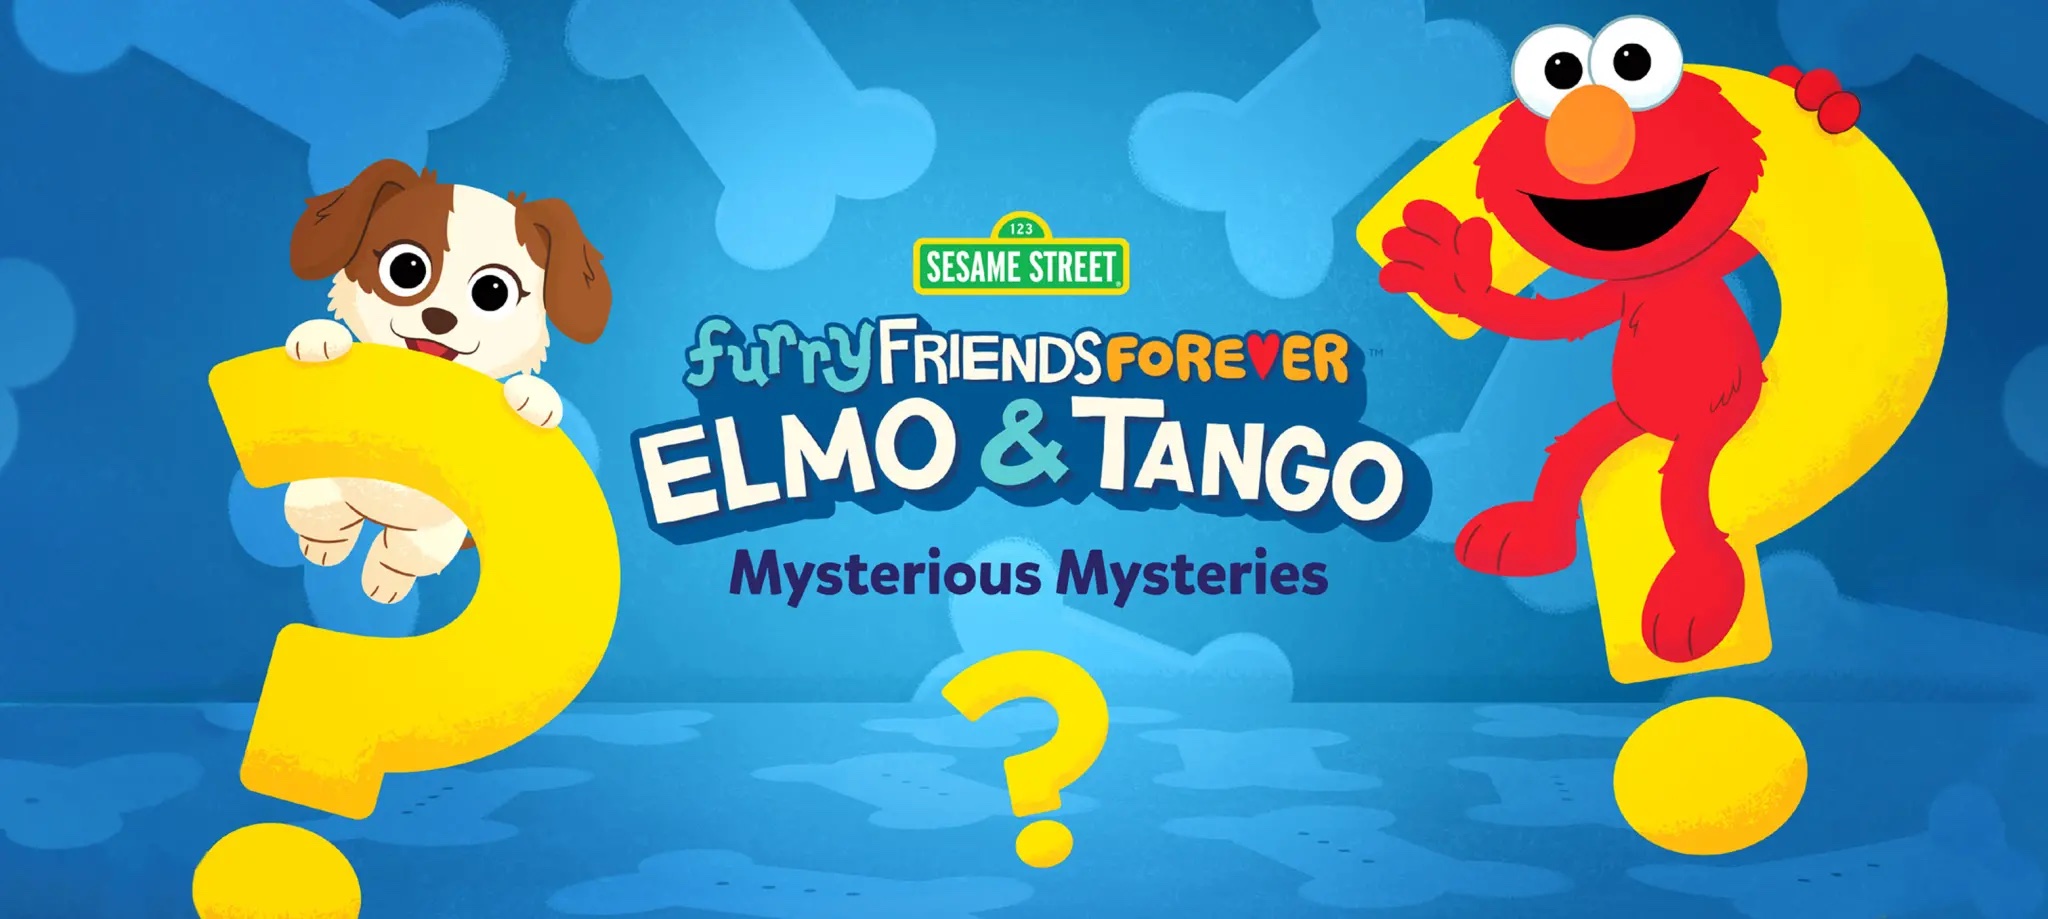 Tango and Elmo play on two over-sized question marks.